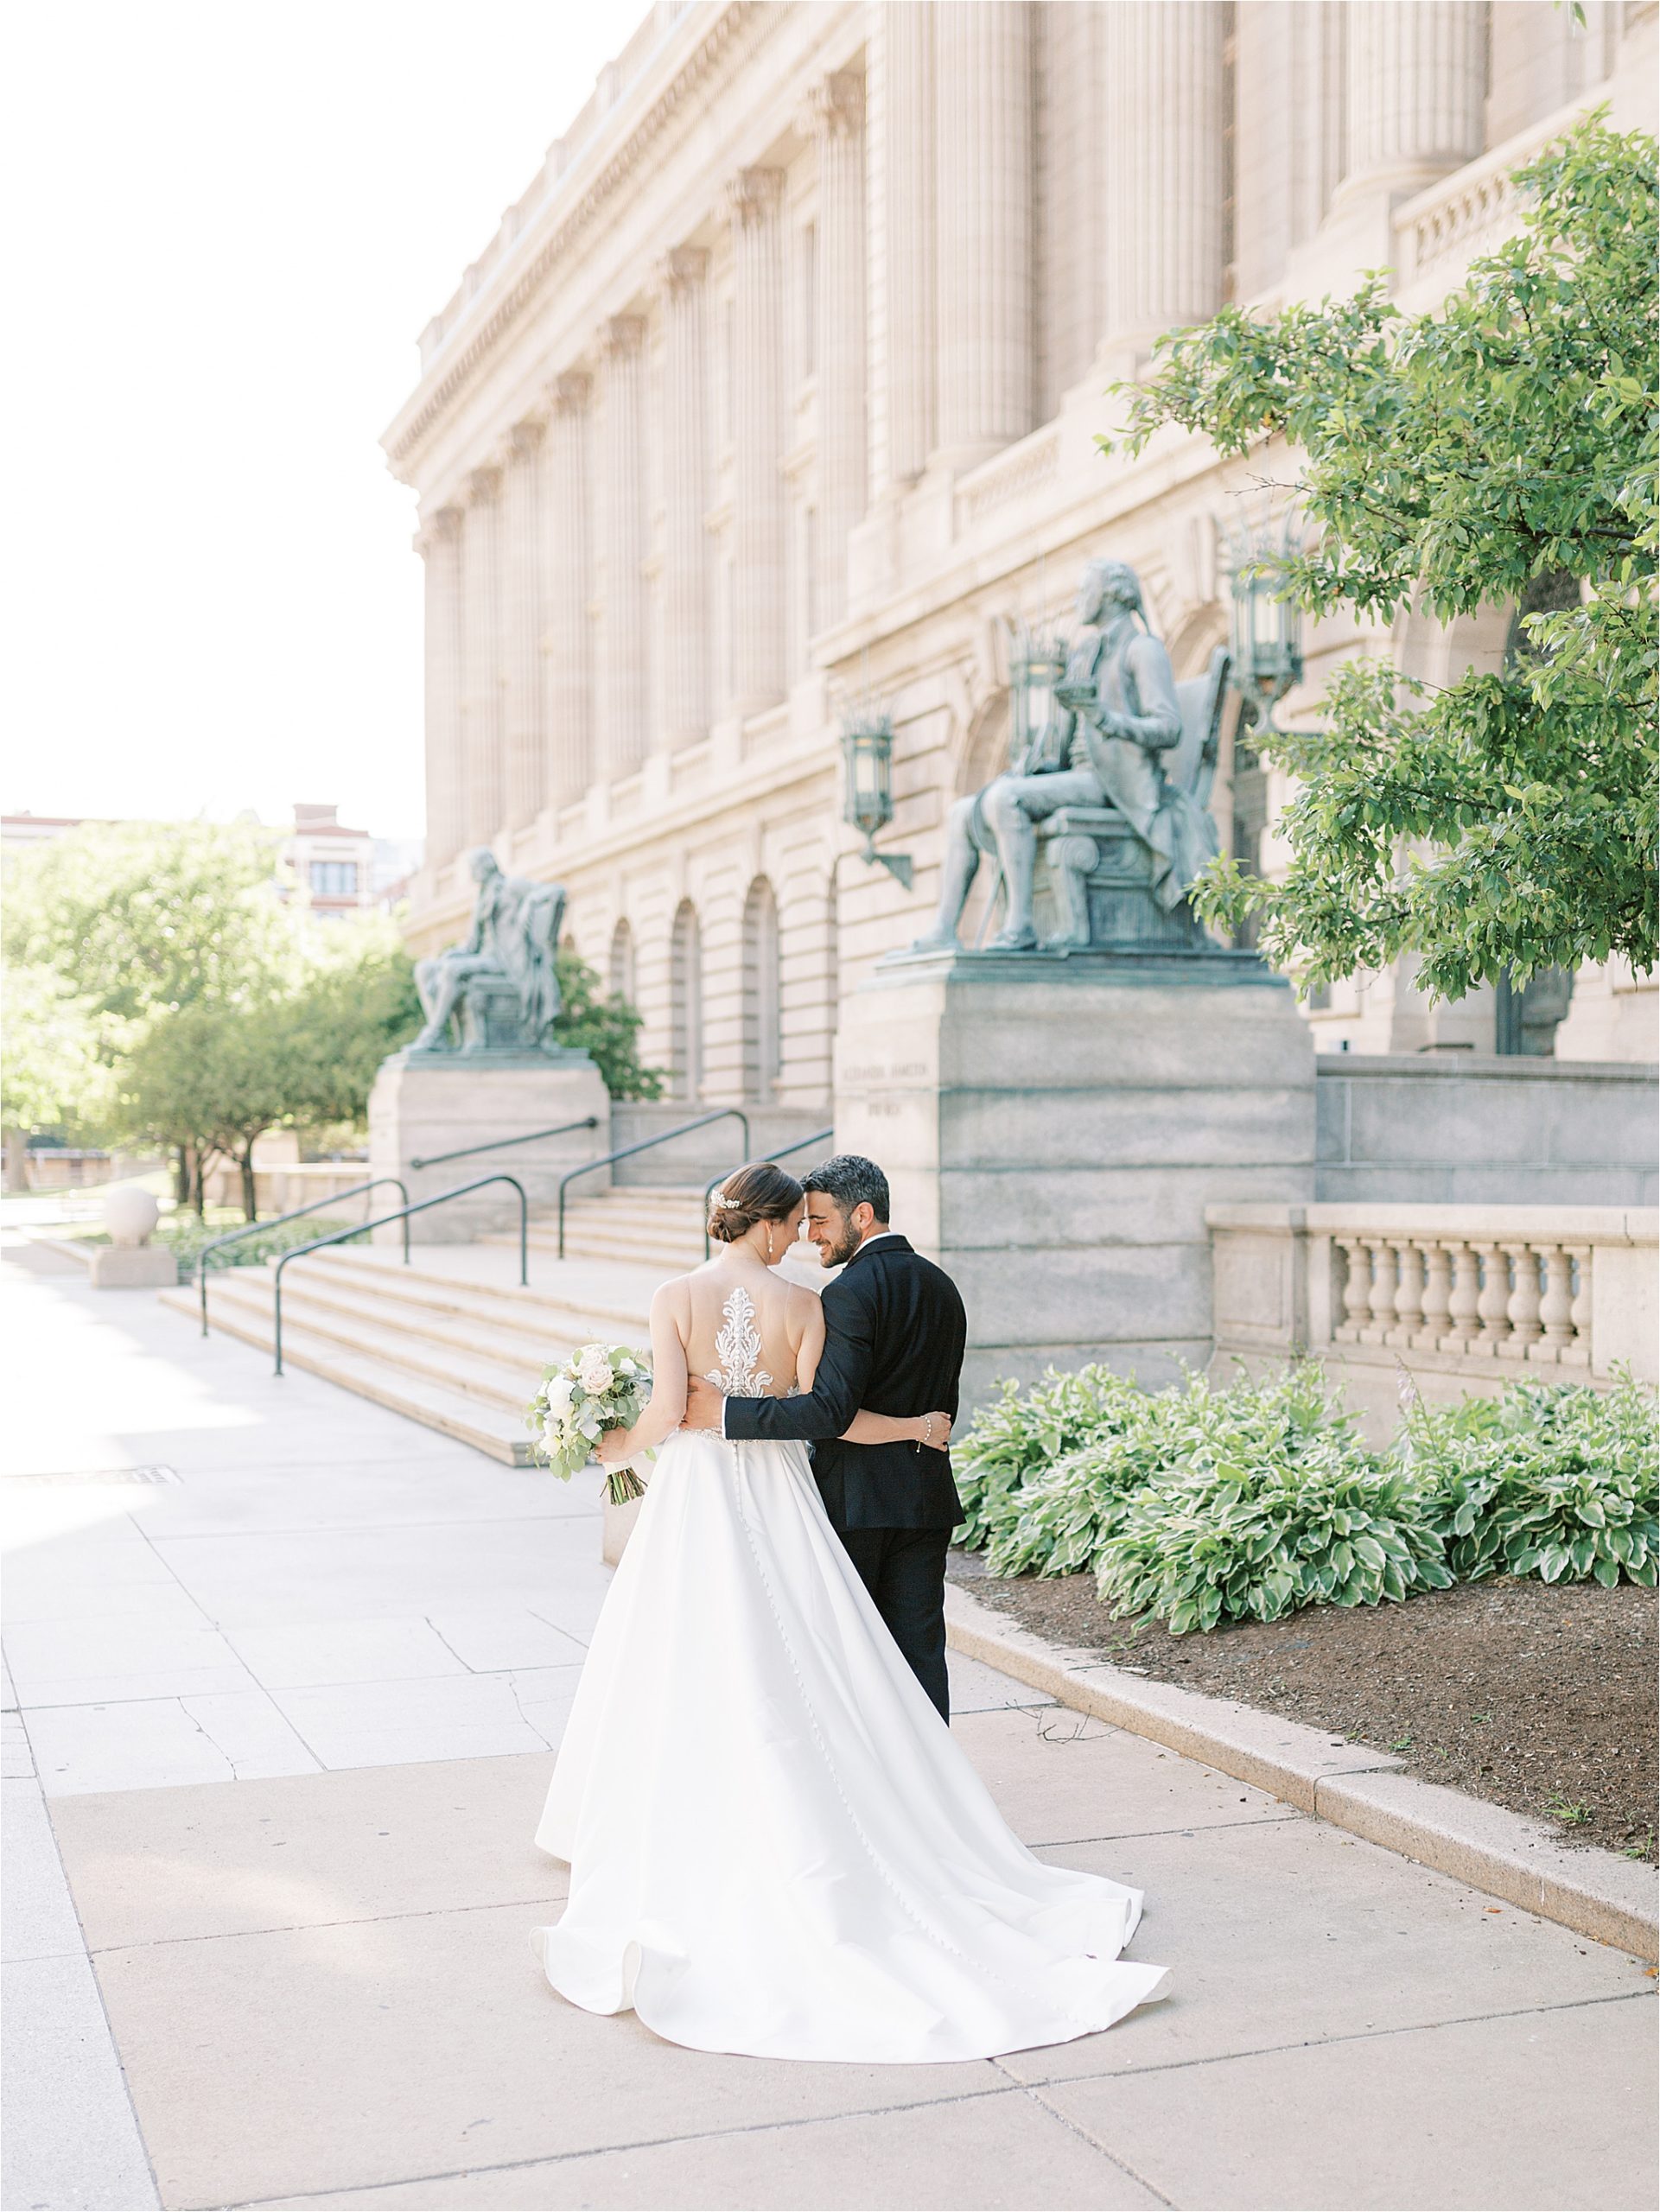 Bride and groom walk away in front of Old Courthouse in Cleveland Ohio